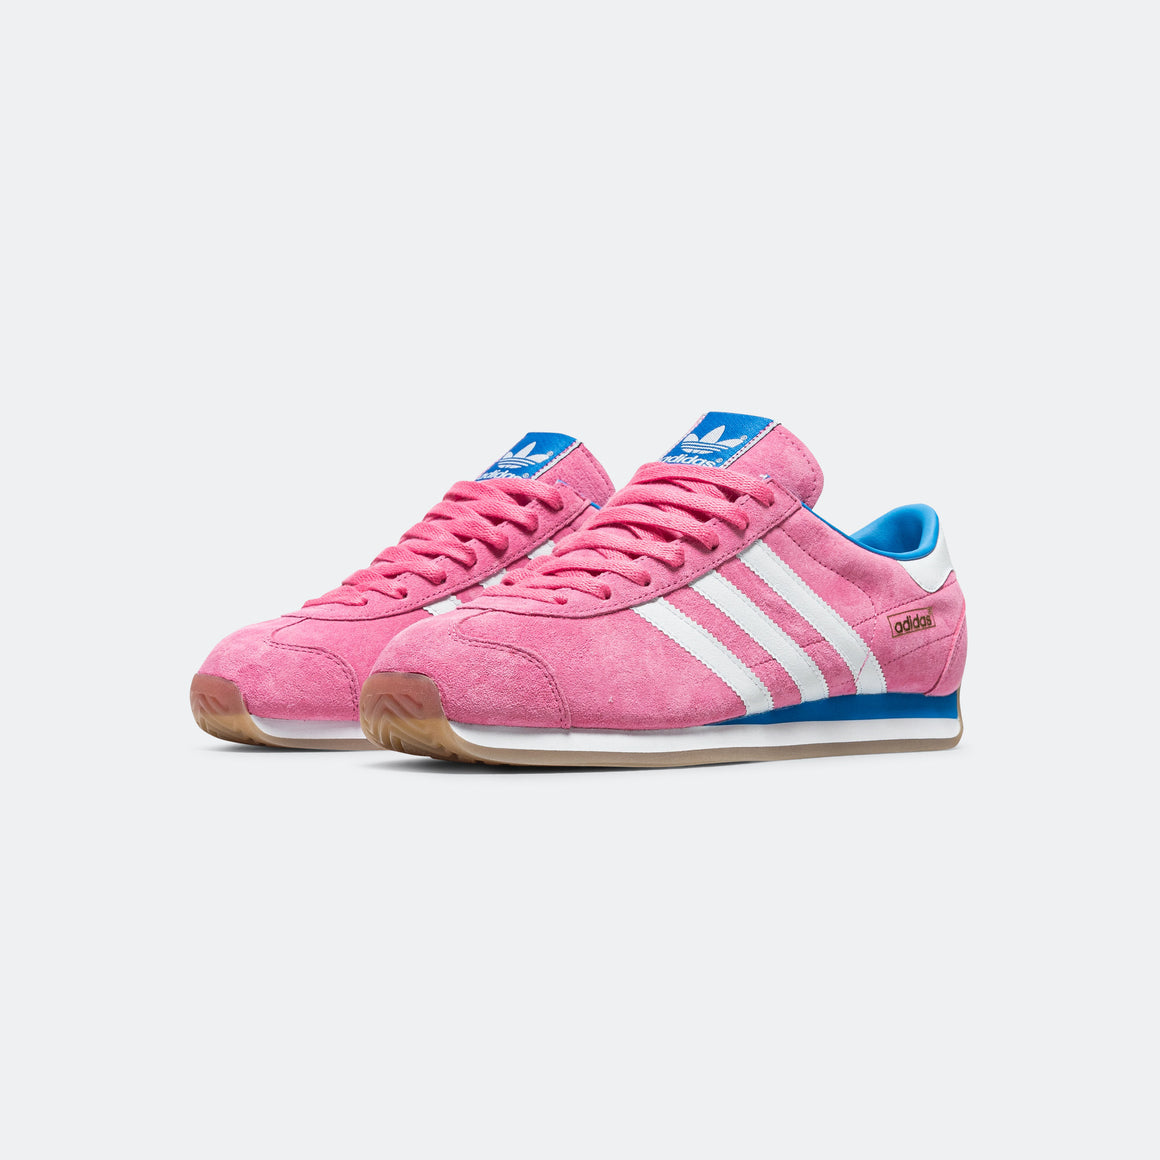 adidas - Country Japan - Pink Fusion/Footwear White-Bright Blue - UP THERE